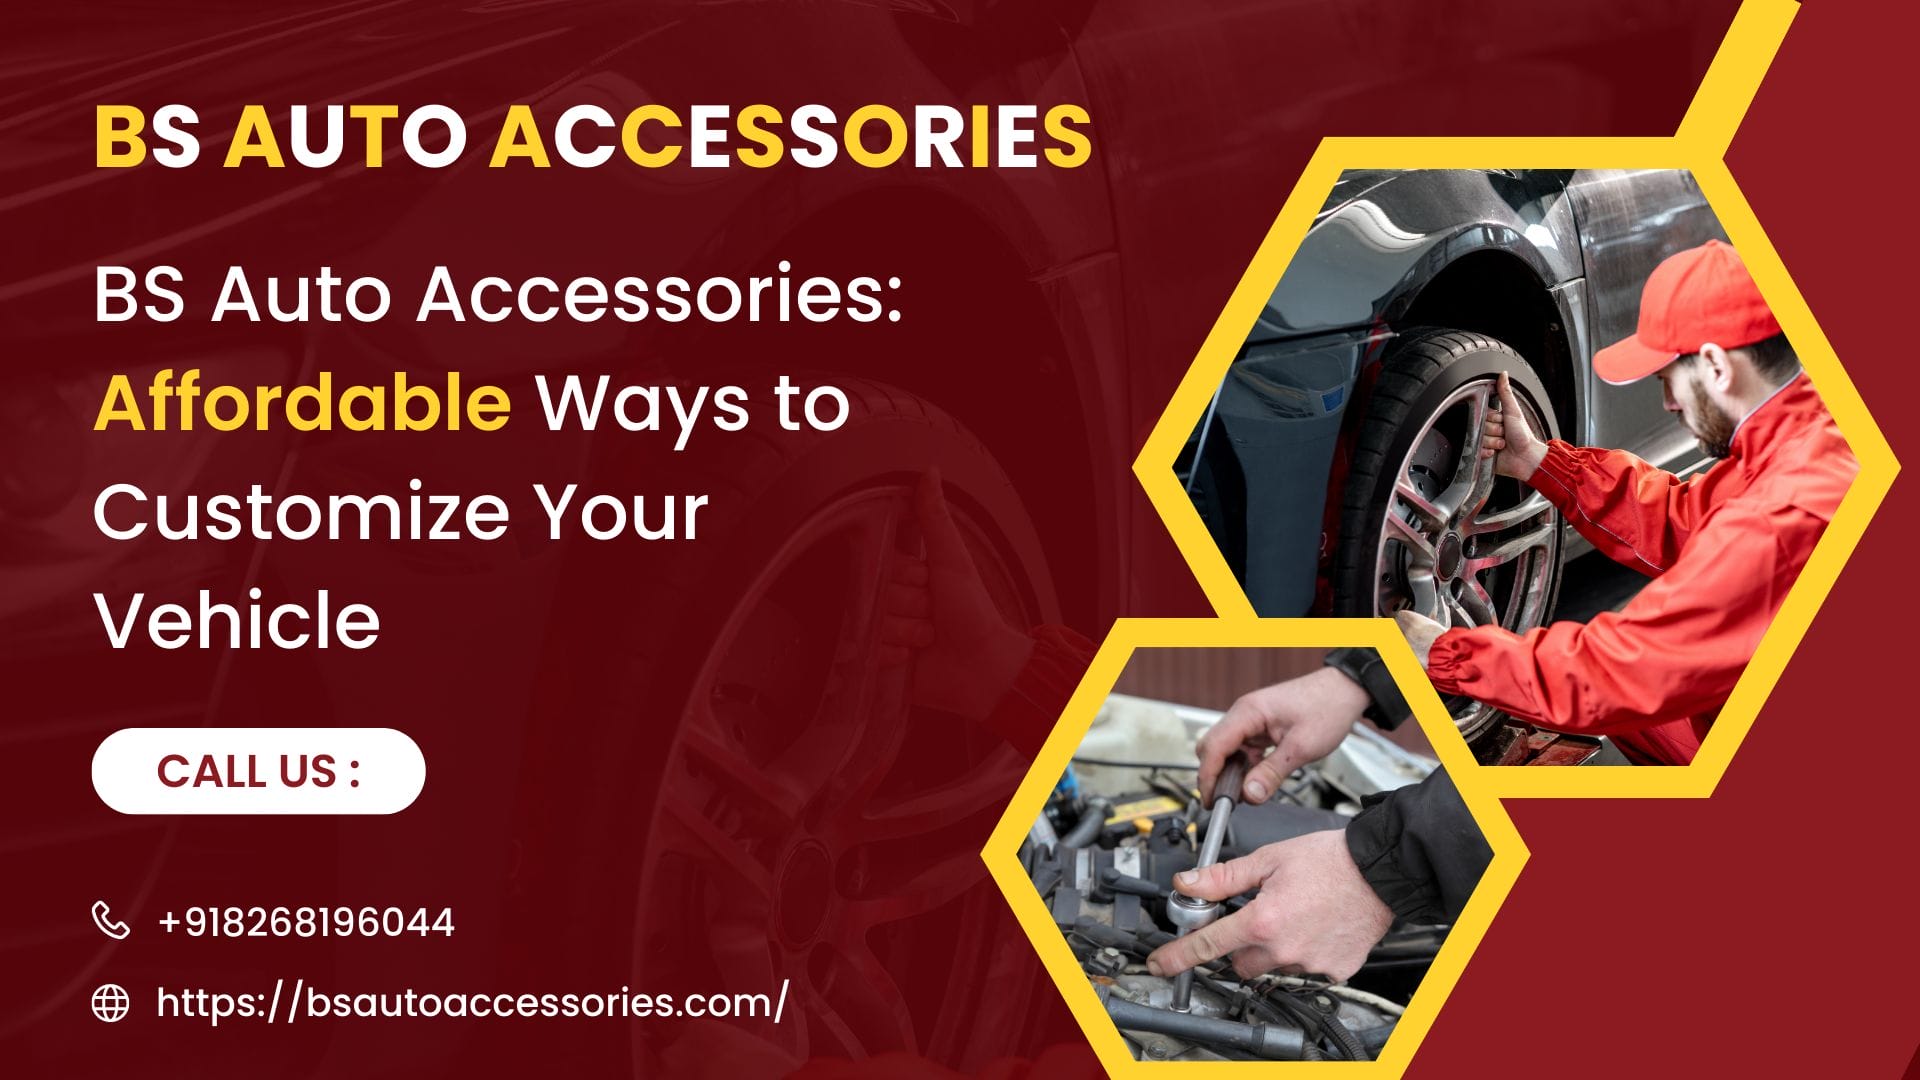 BS Auto Accessories Affordable Ways to Customize Your Vehicle